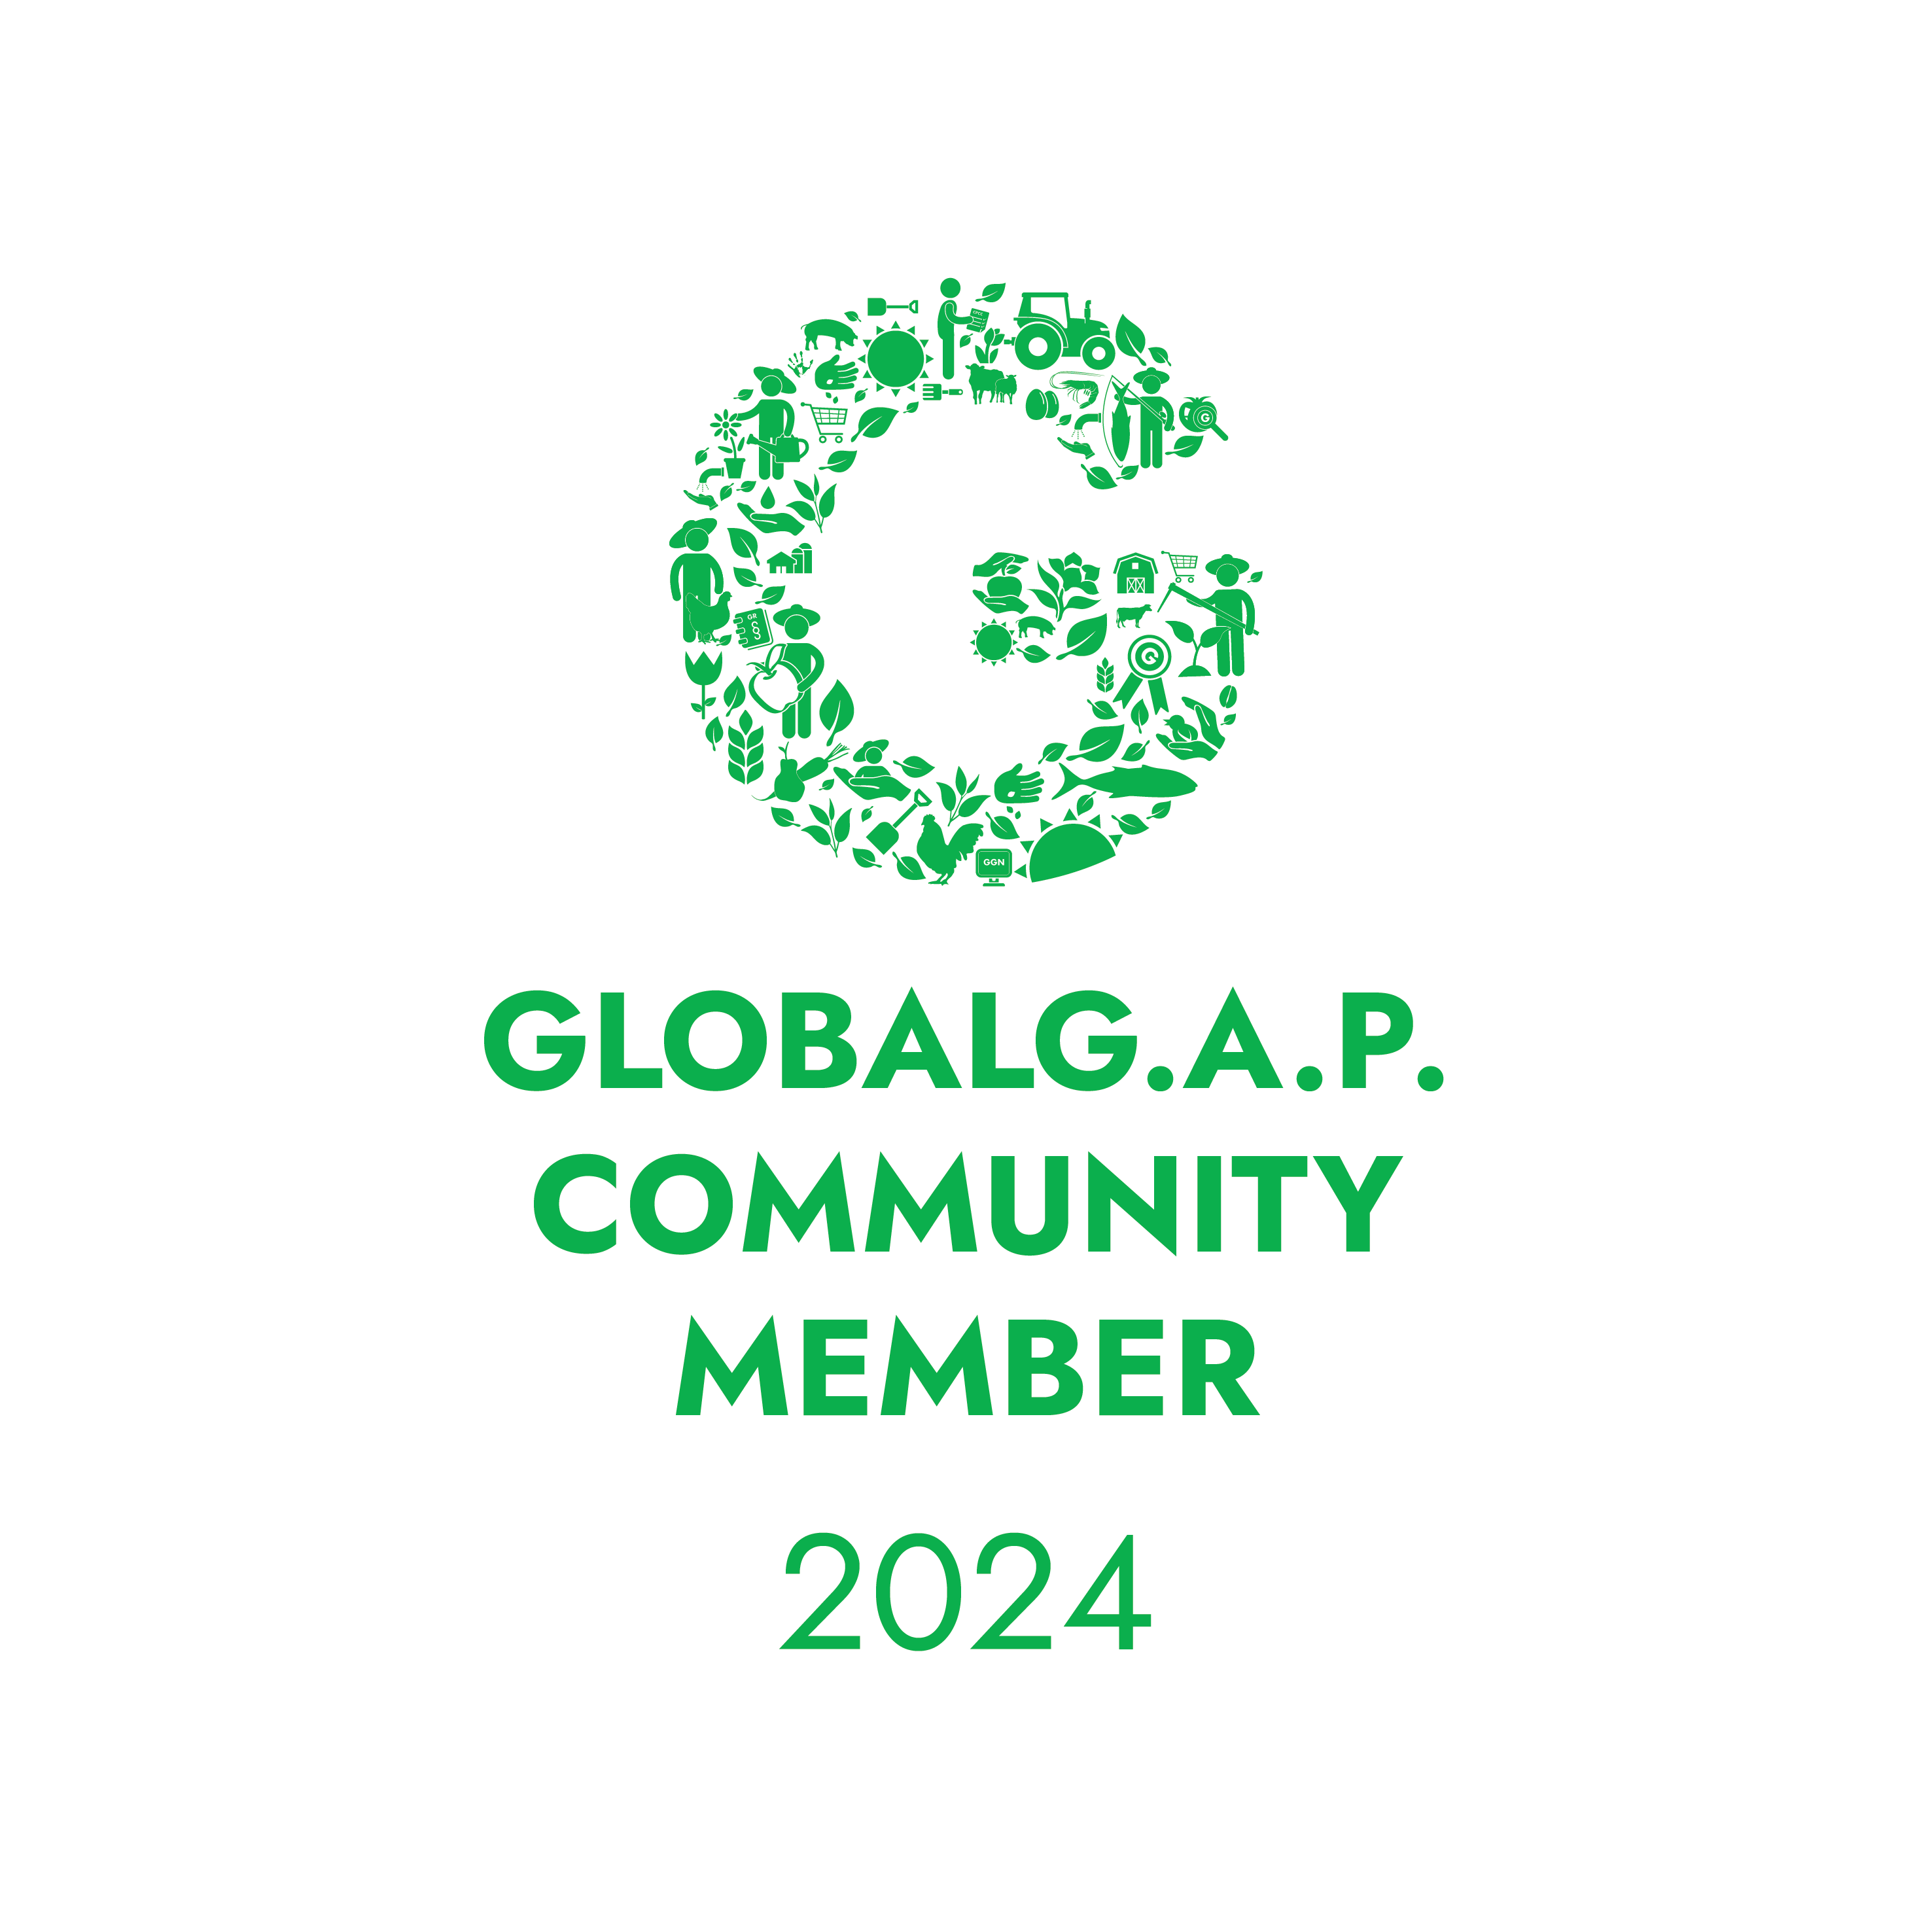 Wikifarmer is an approved GLOBALG.A.P. Community Member for 2024